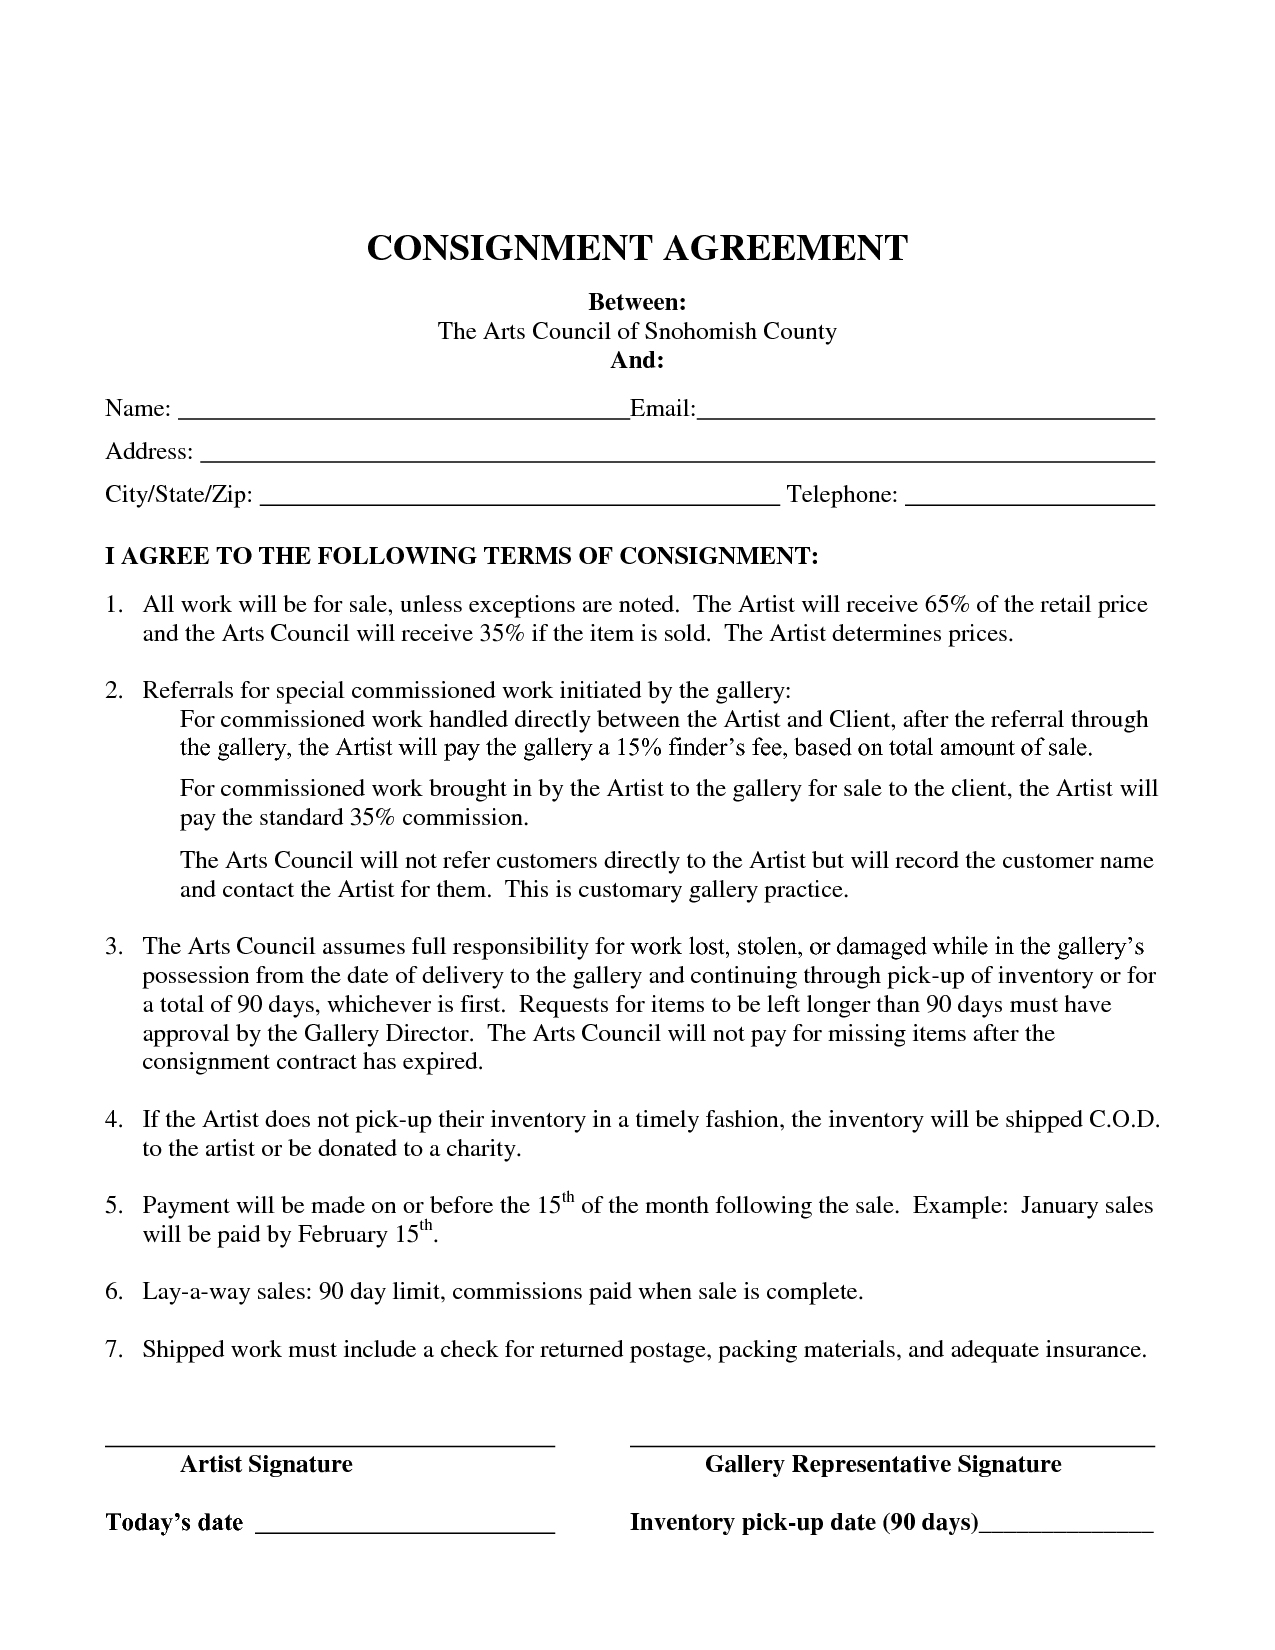 Clothing Consignment Agreement Template Get Simple Consignment Agreement Template Id80595 Opendata